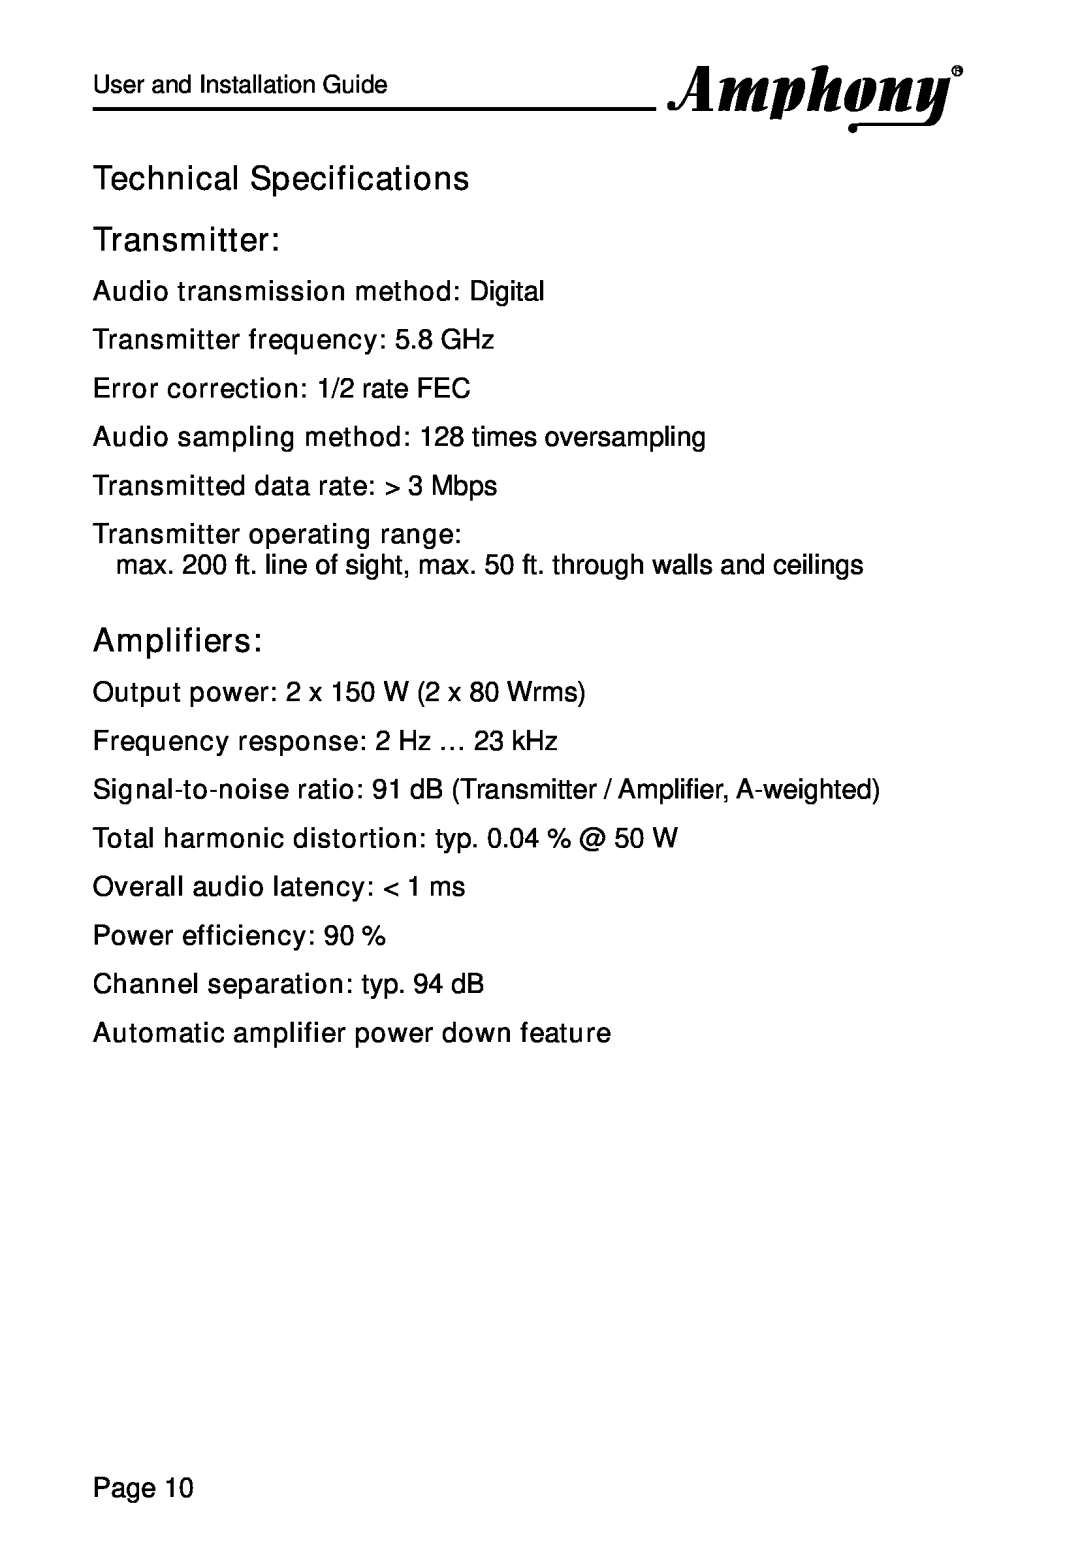 Amphony PMJT1500, L1600 manual Technical Specifications Transmitter, Amplifiers 